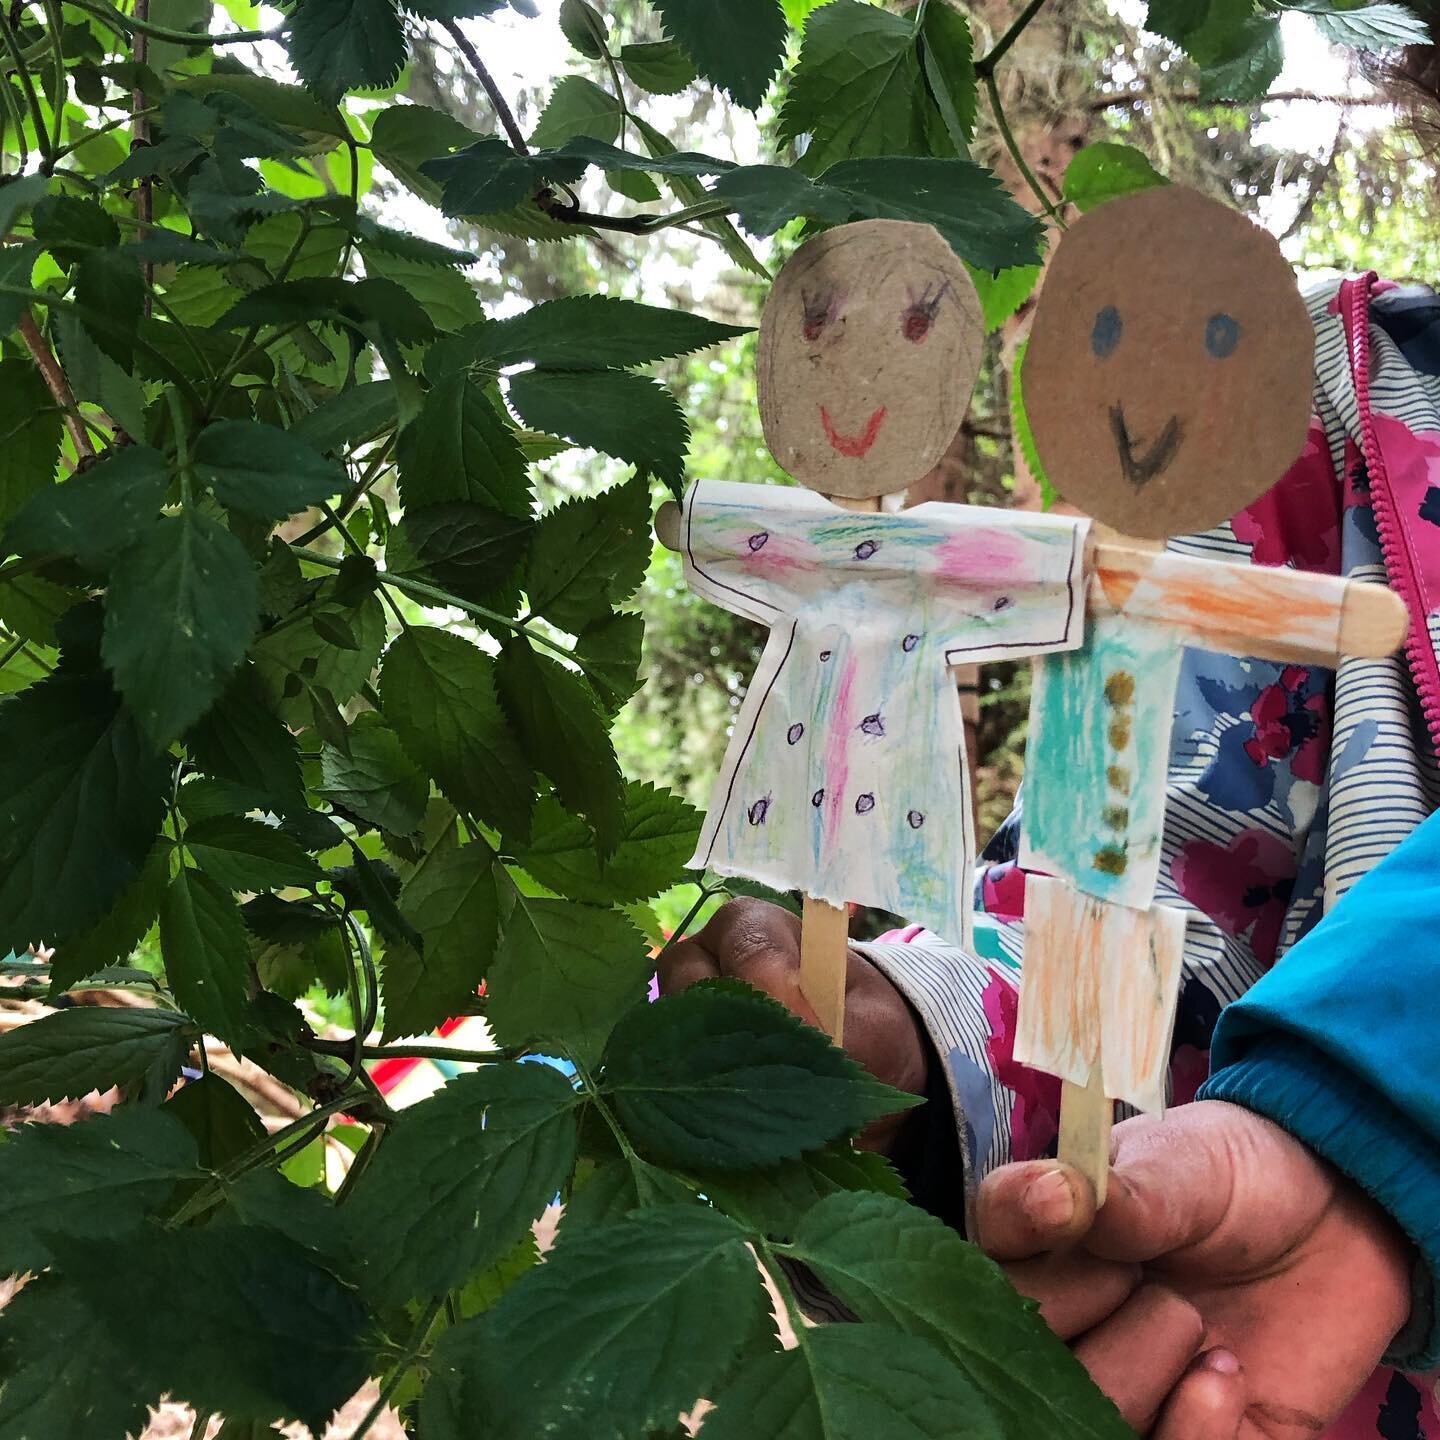 Check out these cuties hanging out amongst the leaves! 🌿

#puppetmaking
#wildcrafting 
#natureplay
#wildschooling
#homeeducation 
#homeeduk 
#educationoutside
#educationoutdoors
#tinyschoolshiddenlearning
#regenerativeducation
#regenerativelearning
